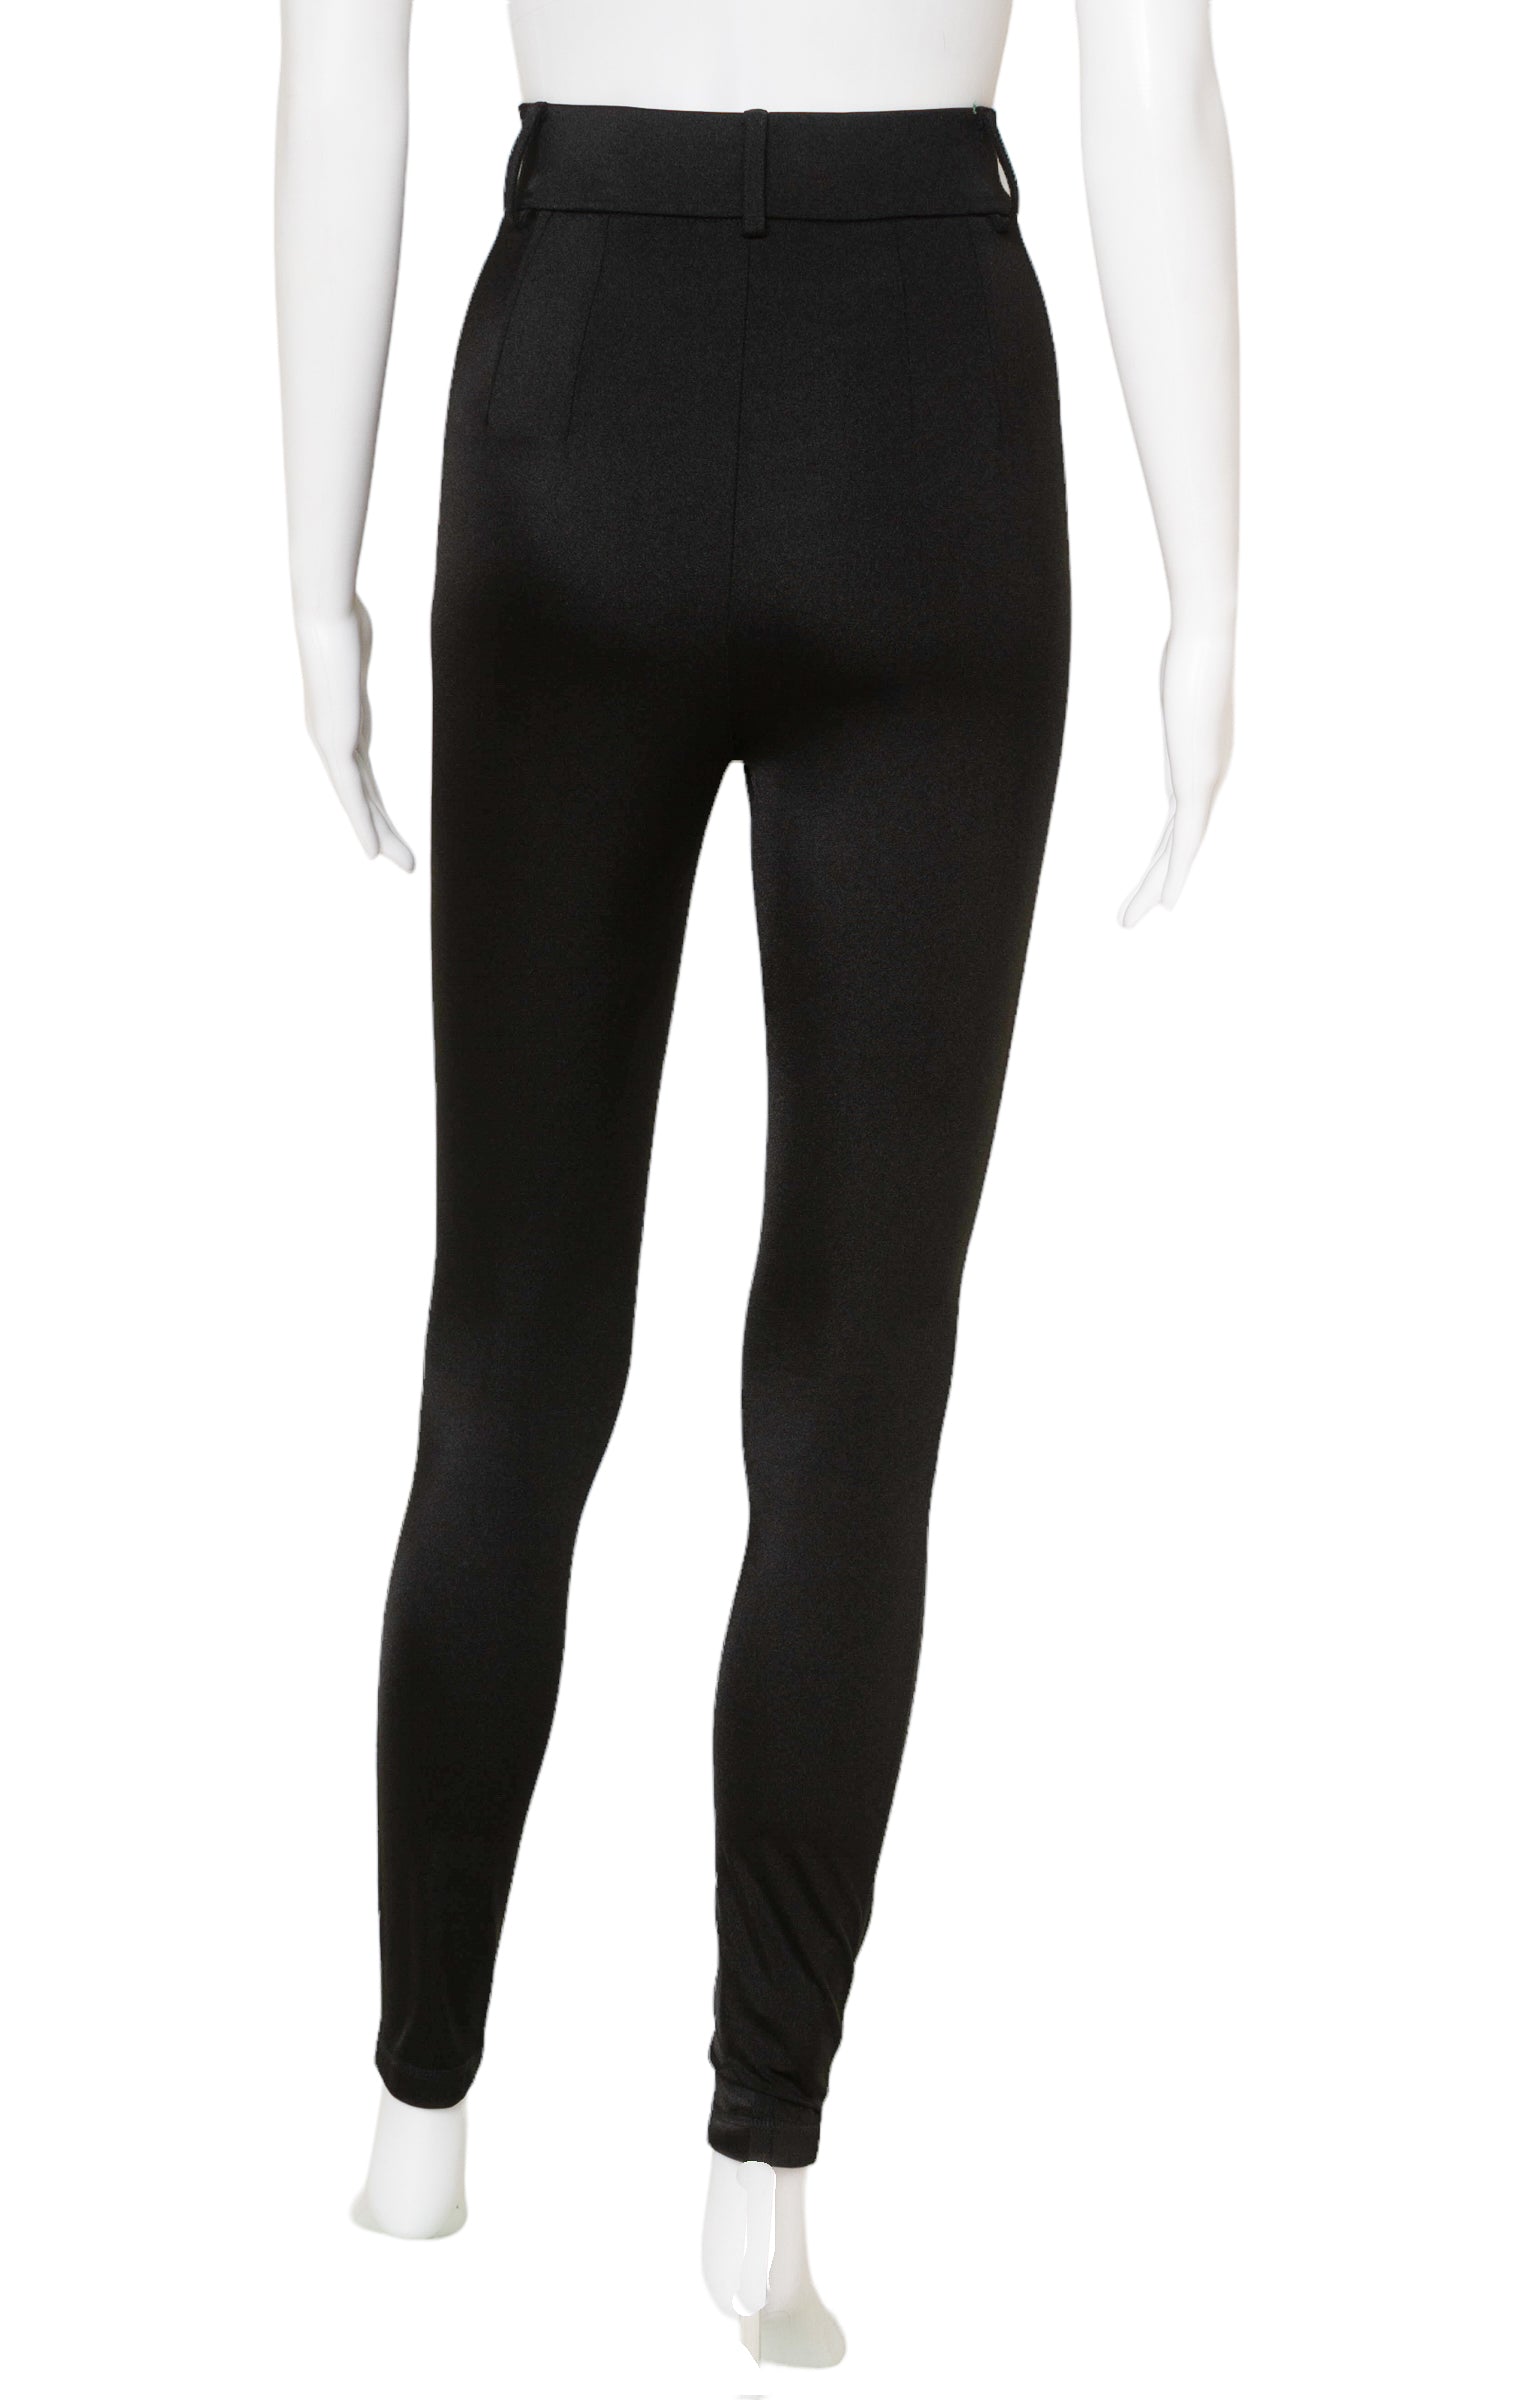 DOLCE & GABBANA (NEW) with tags Pants Size: IT 38 / Comparable to US 0